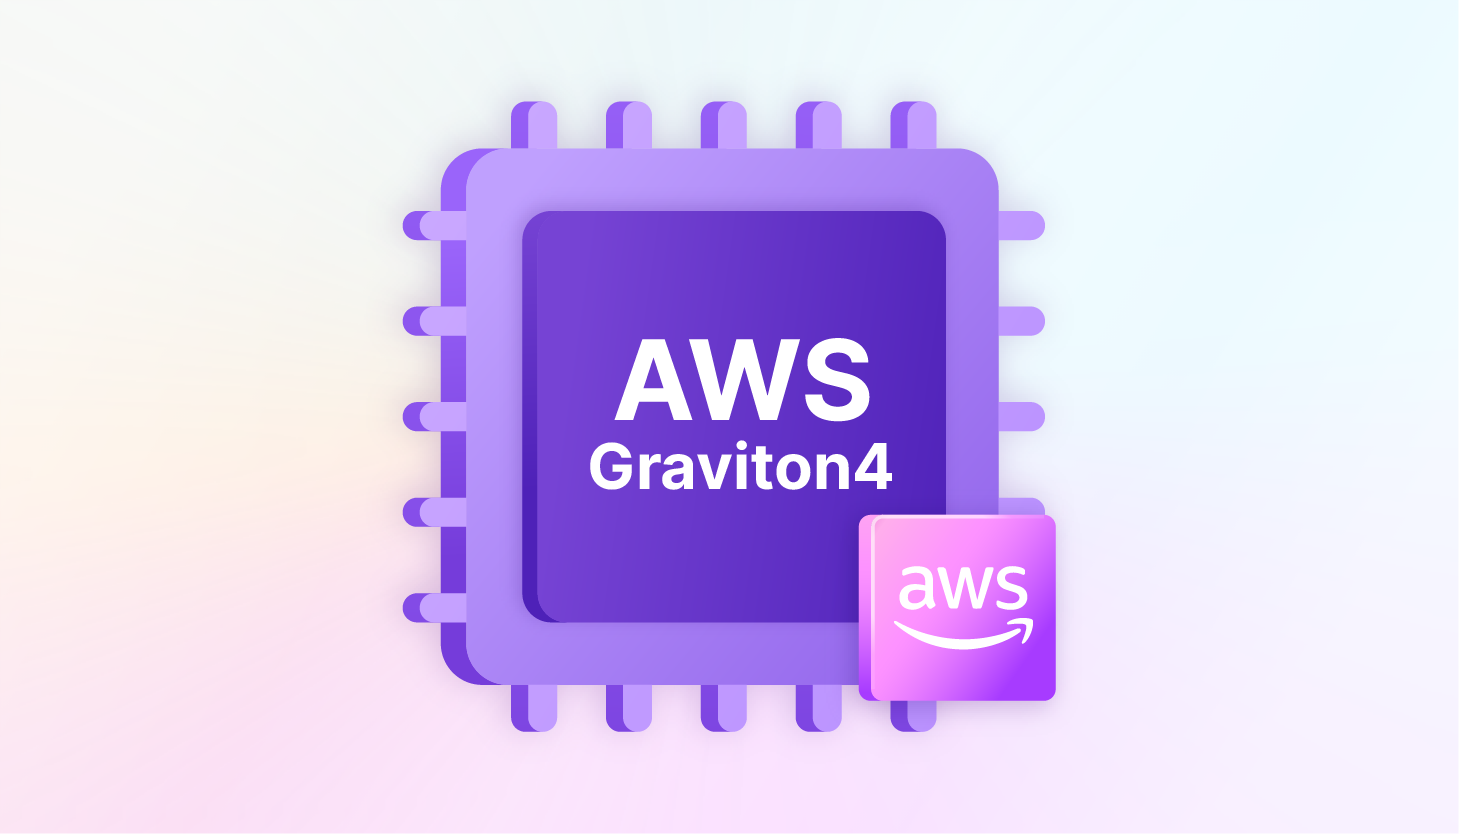 Introducing New Amazon EC2 R8g Instances with AWS Graviton4 Chips!